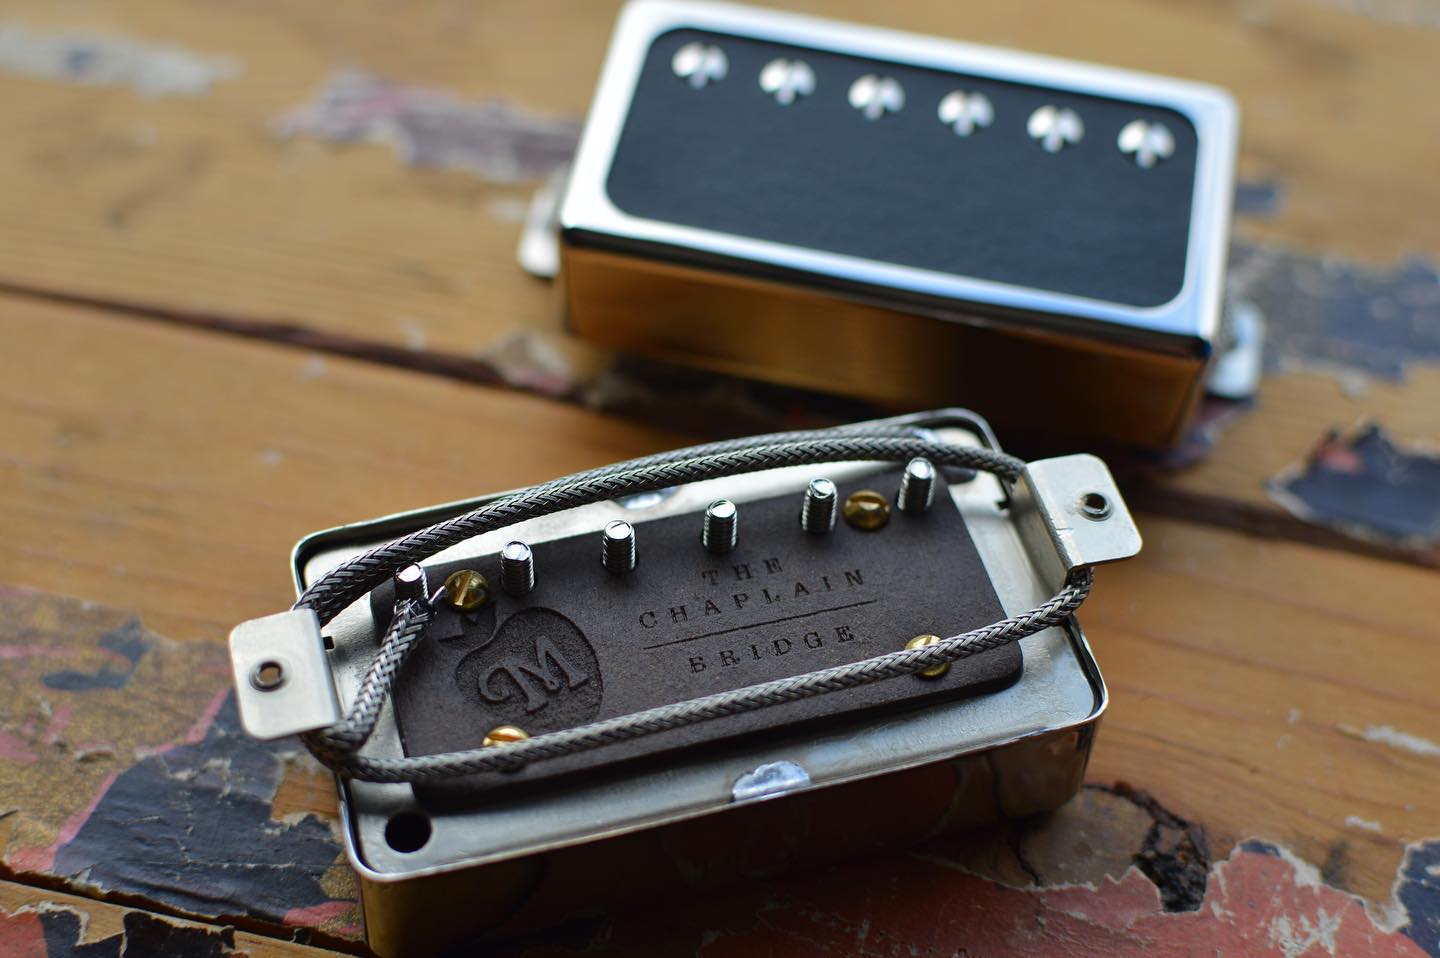 Meet the latest McNelly Pickups set! The Chaplain